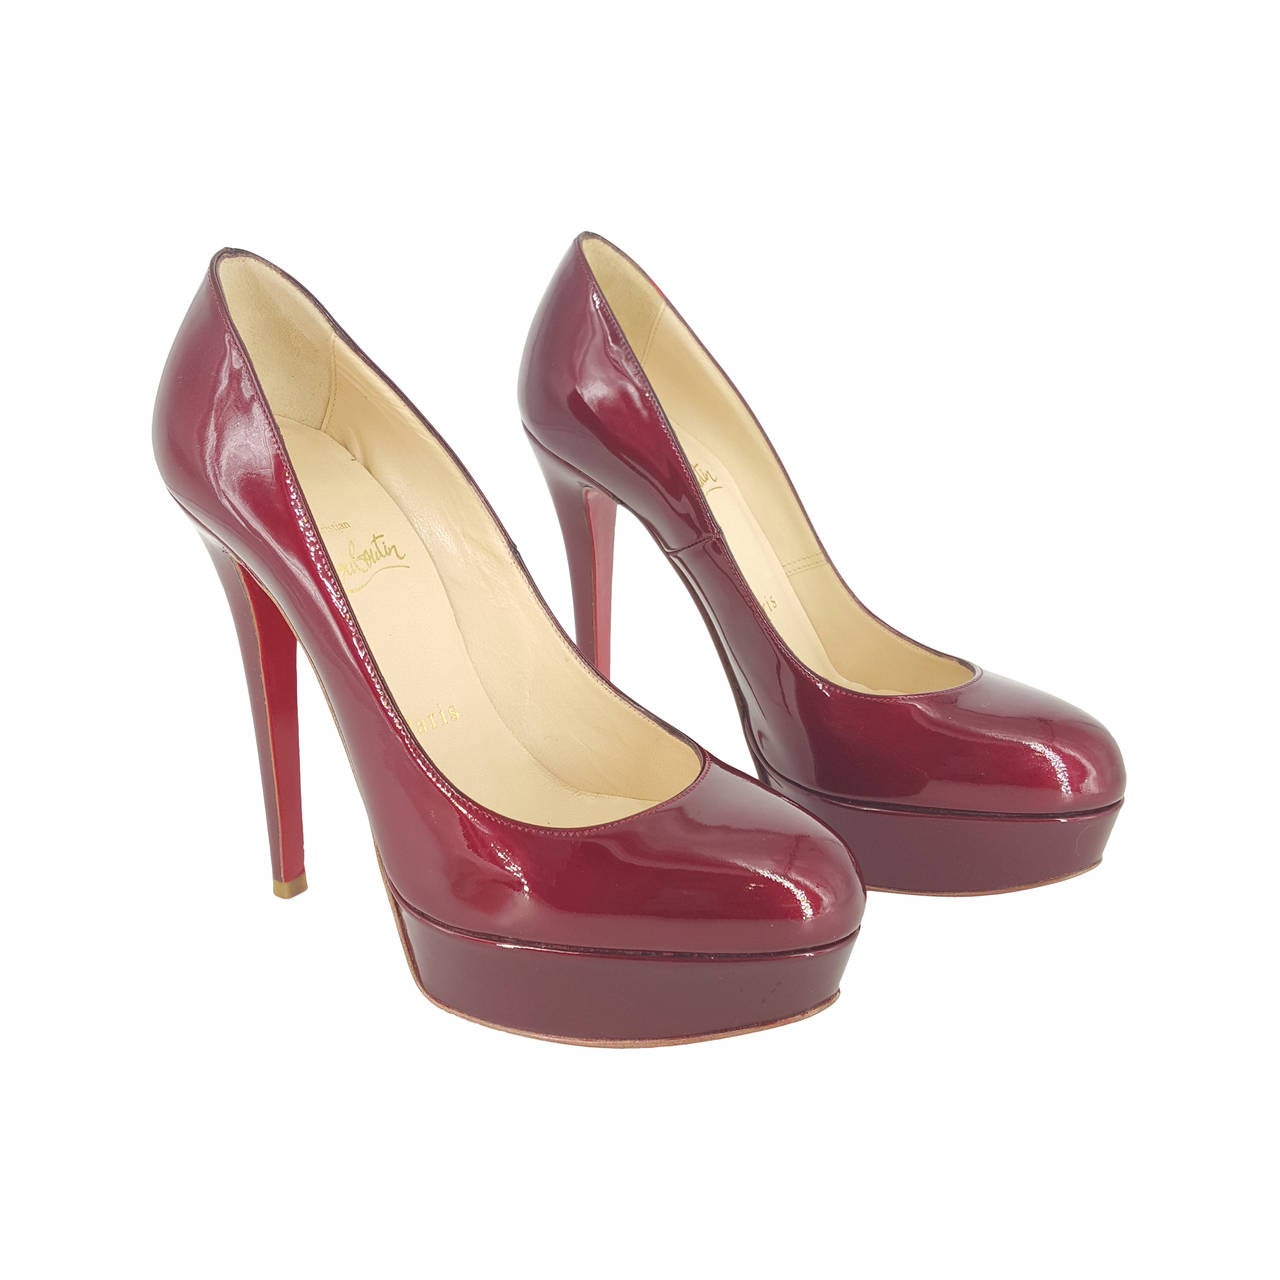 Christian Louboutin Candy Apple Red Patent Leather Pumps Size 36 1/2 For Sale